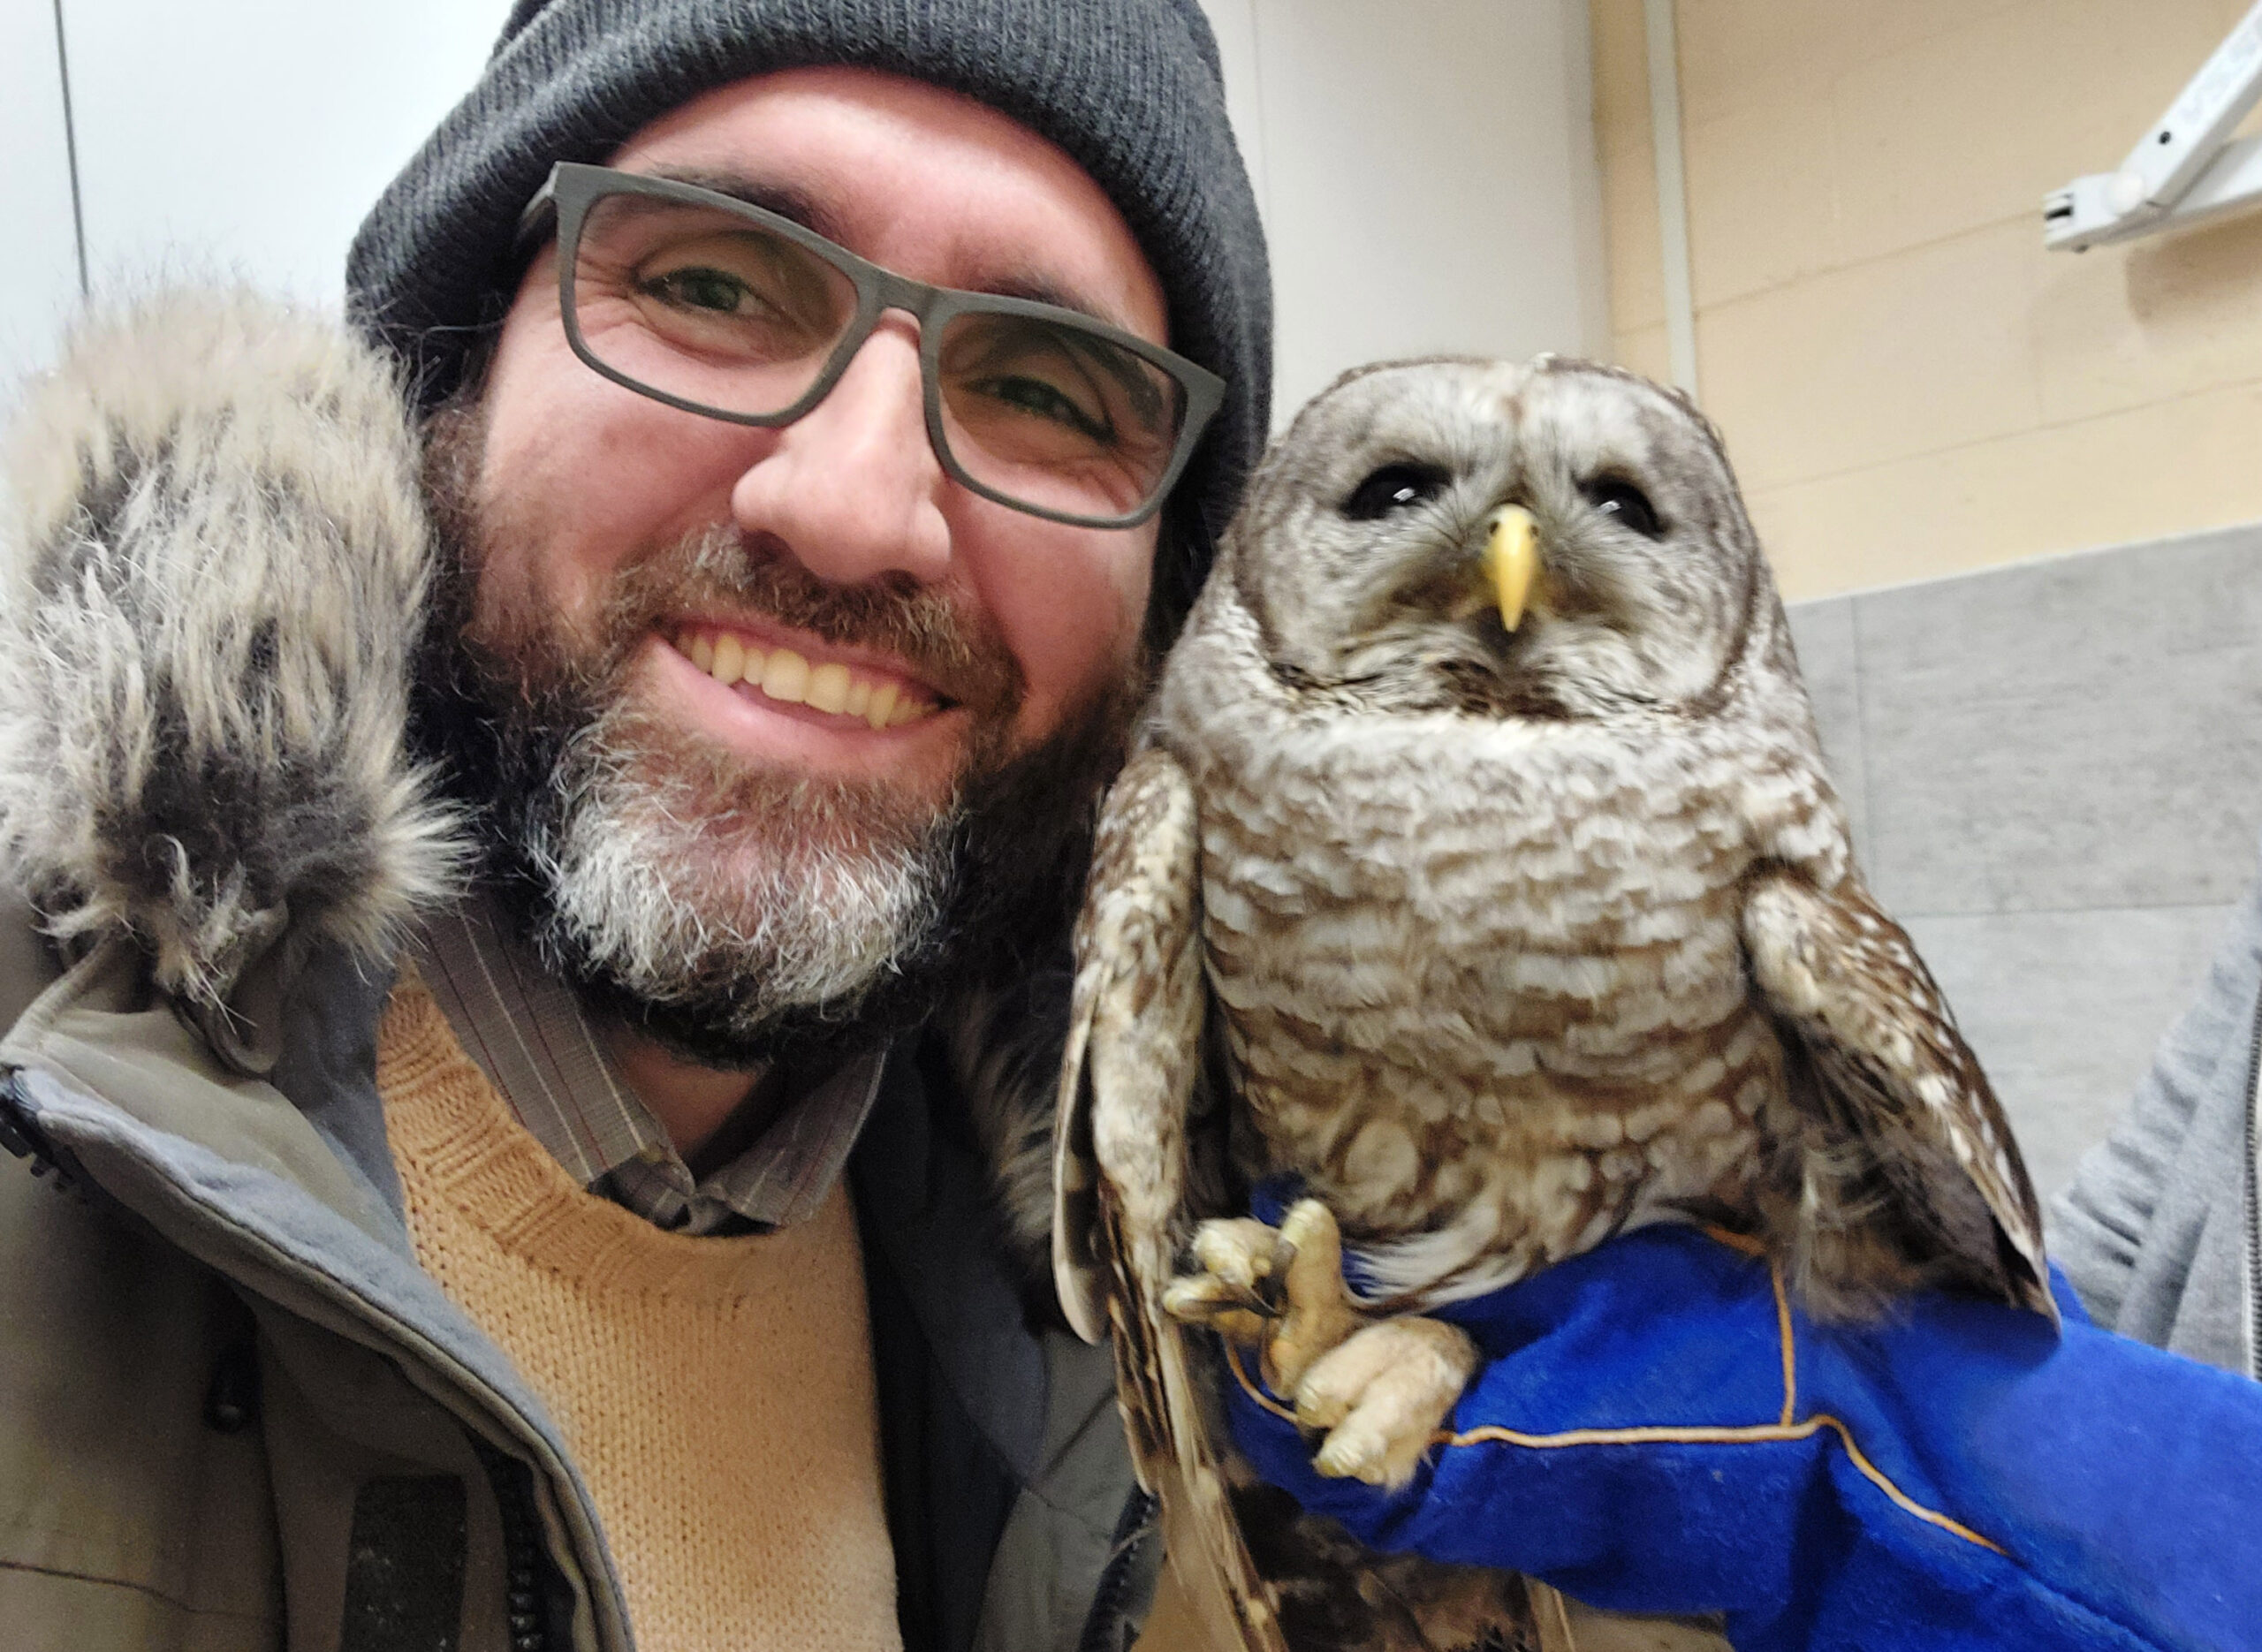 Rehabilitation animal of the month: Barred owl